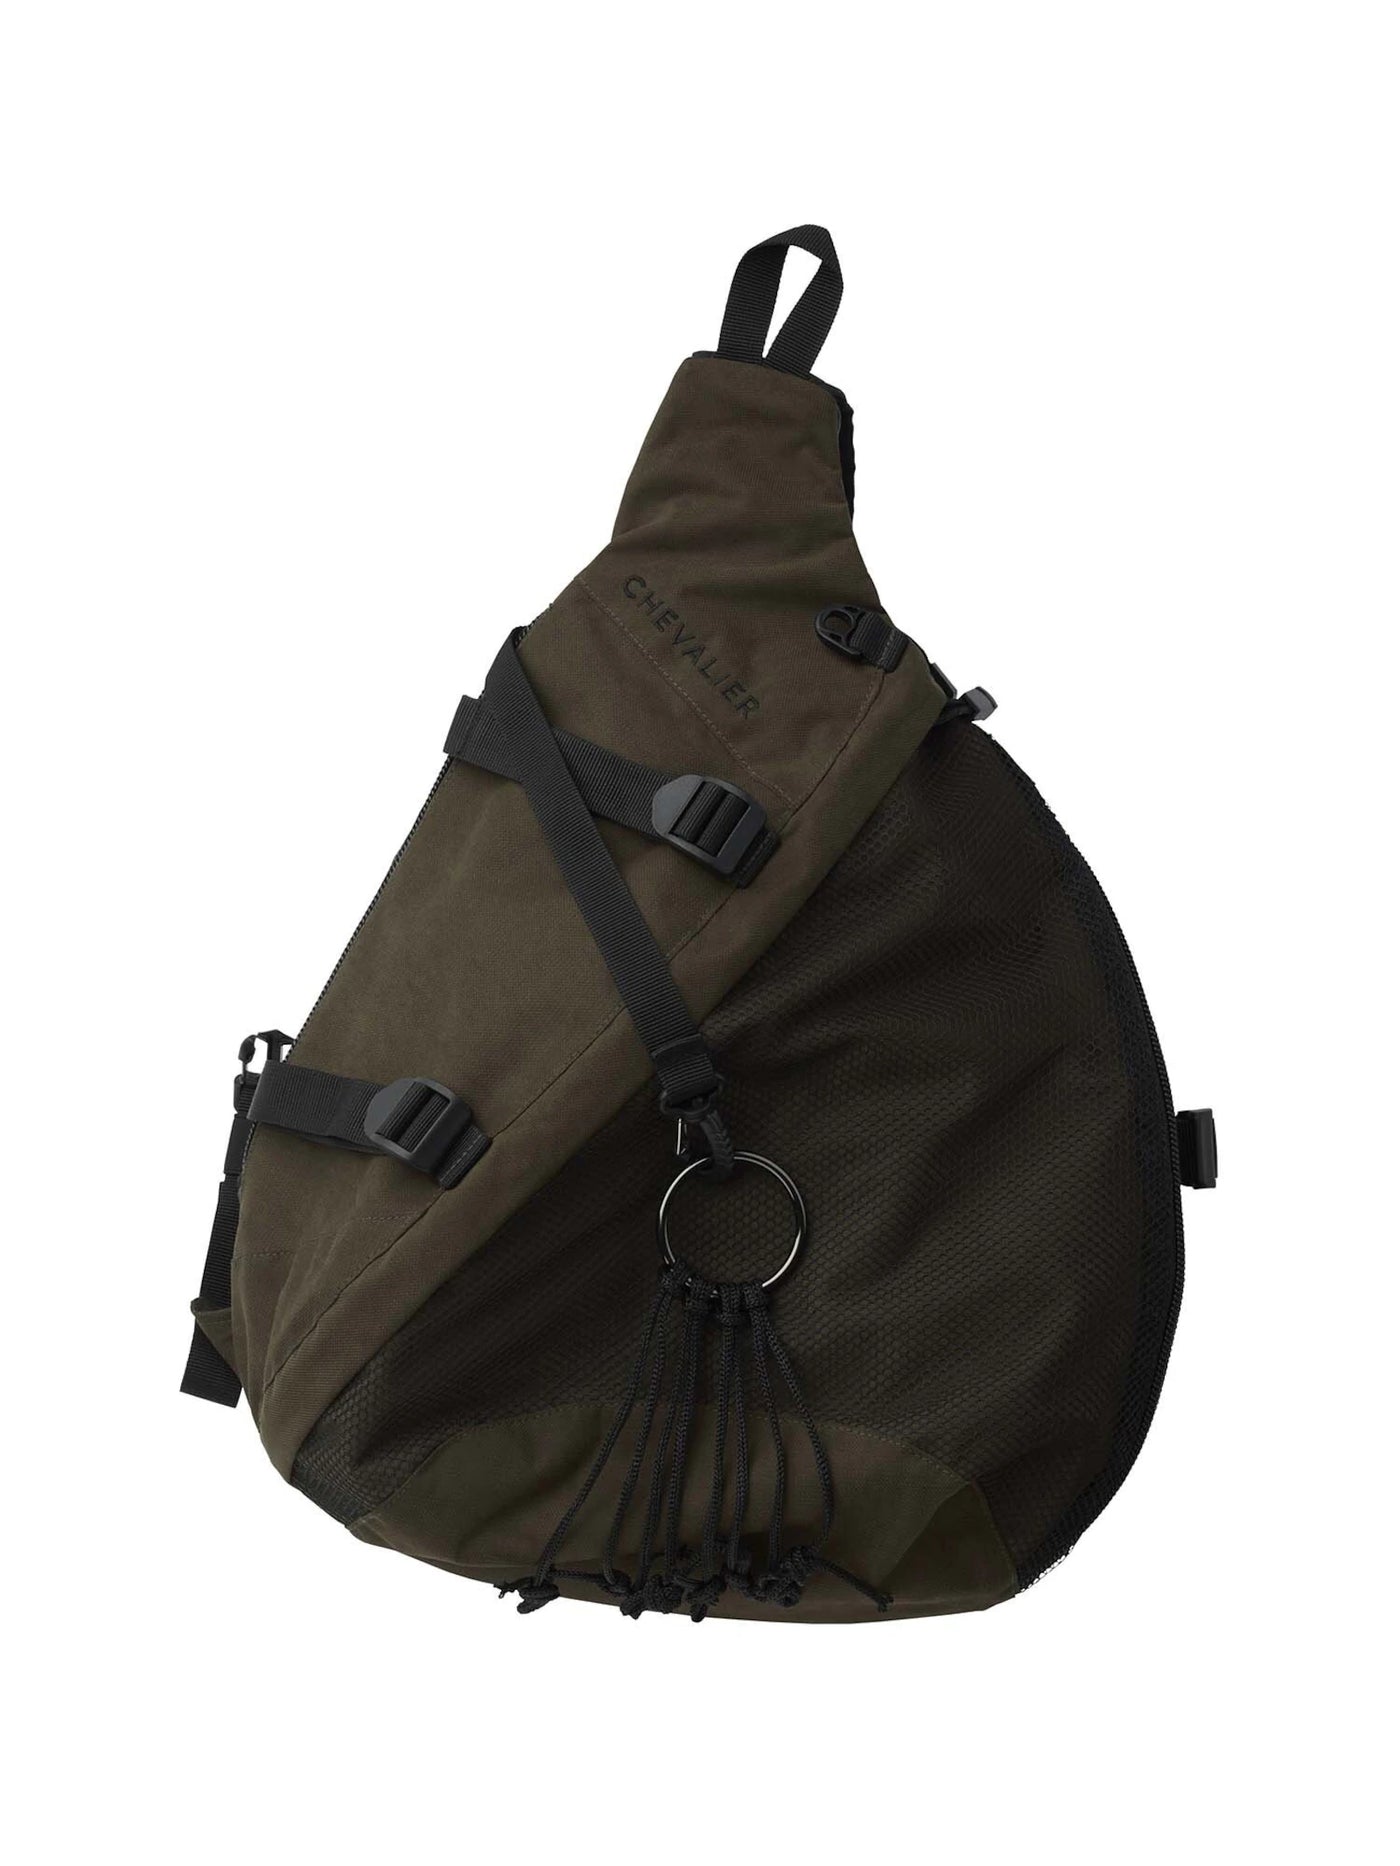 Chevalier Grouse Triangle back pack 17 L, Forest green